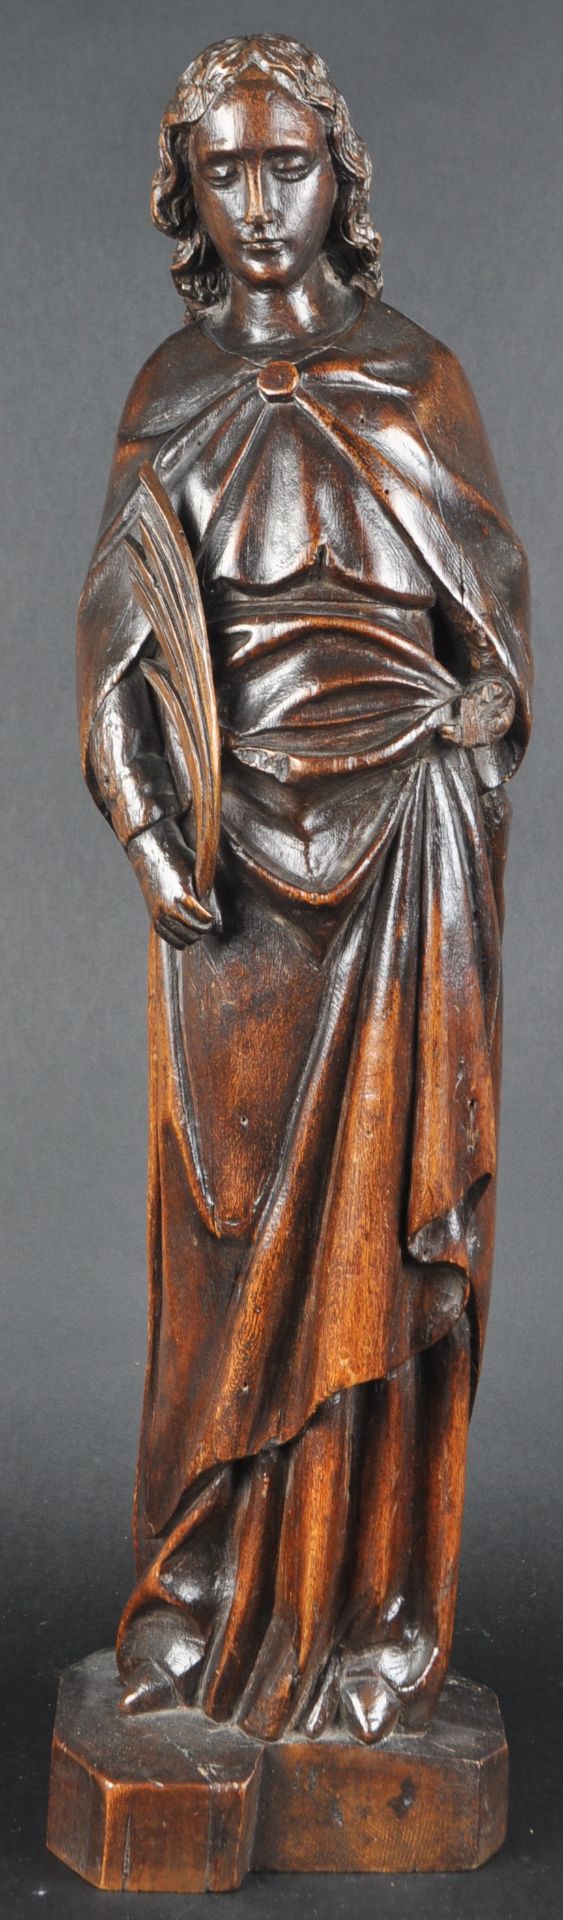 19TH CENTURY MAHOGANY CARVED STATUE OF A SAINT